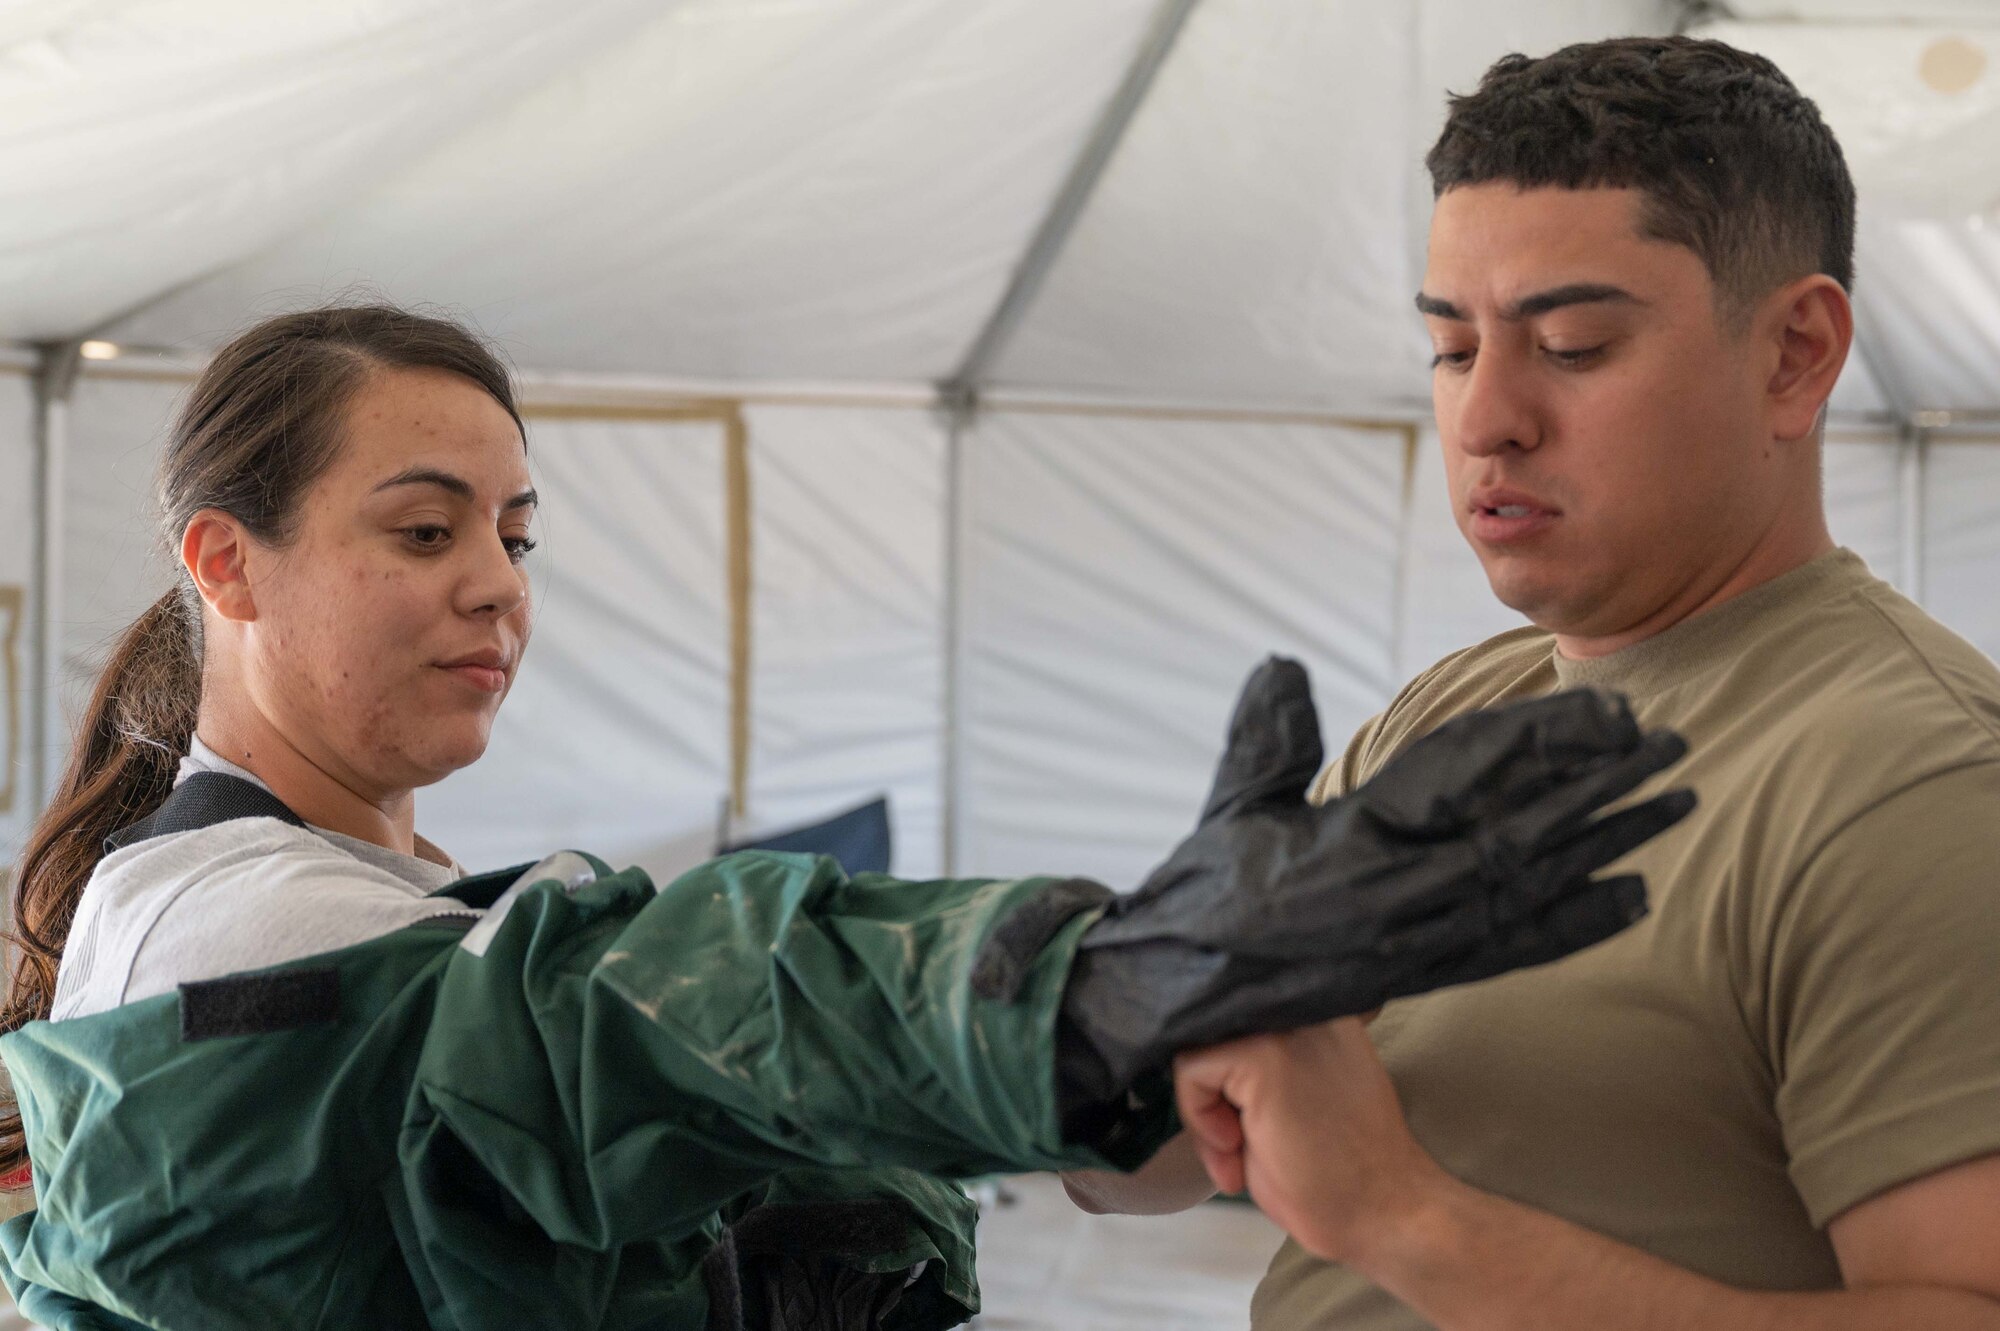 Staff Sgt. Candelaria Flores dons her chemical warfare ensemble with the assistance of Staff Sgt. Sergio Cano during an in-person combined training event with other Air and Army National Guard units this week in Las Vegas. Both are FSS Specialists who have volunteered for the 162nd FSS FSRT mission.